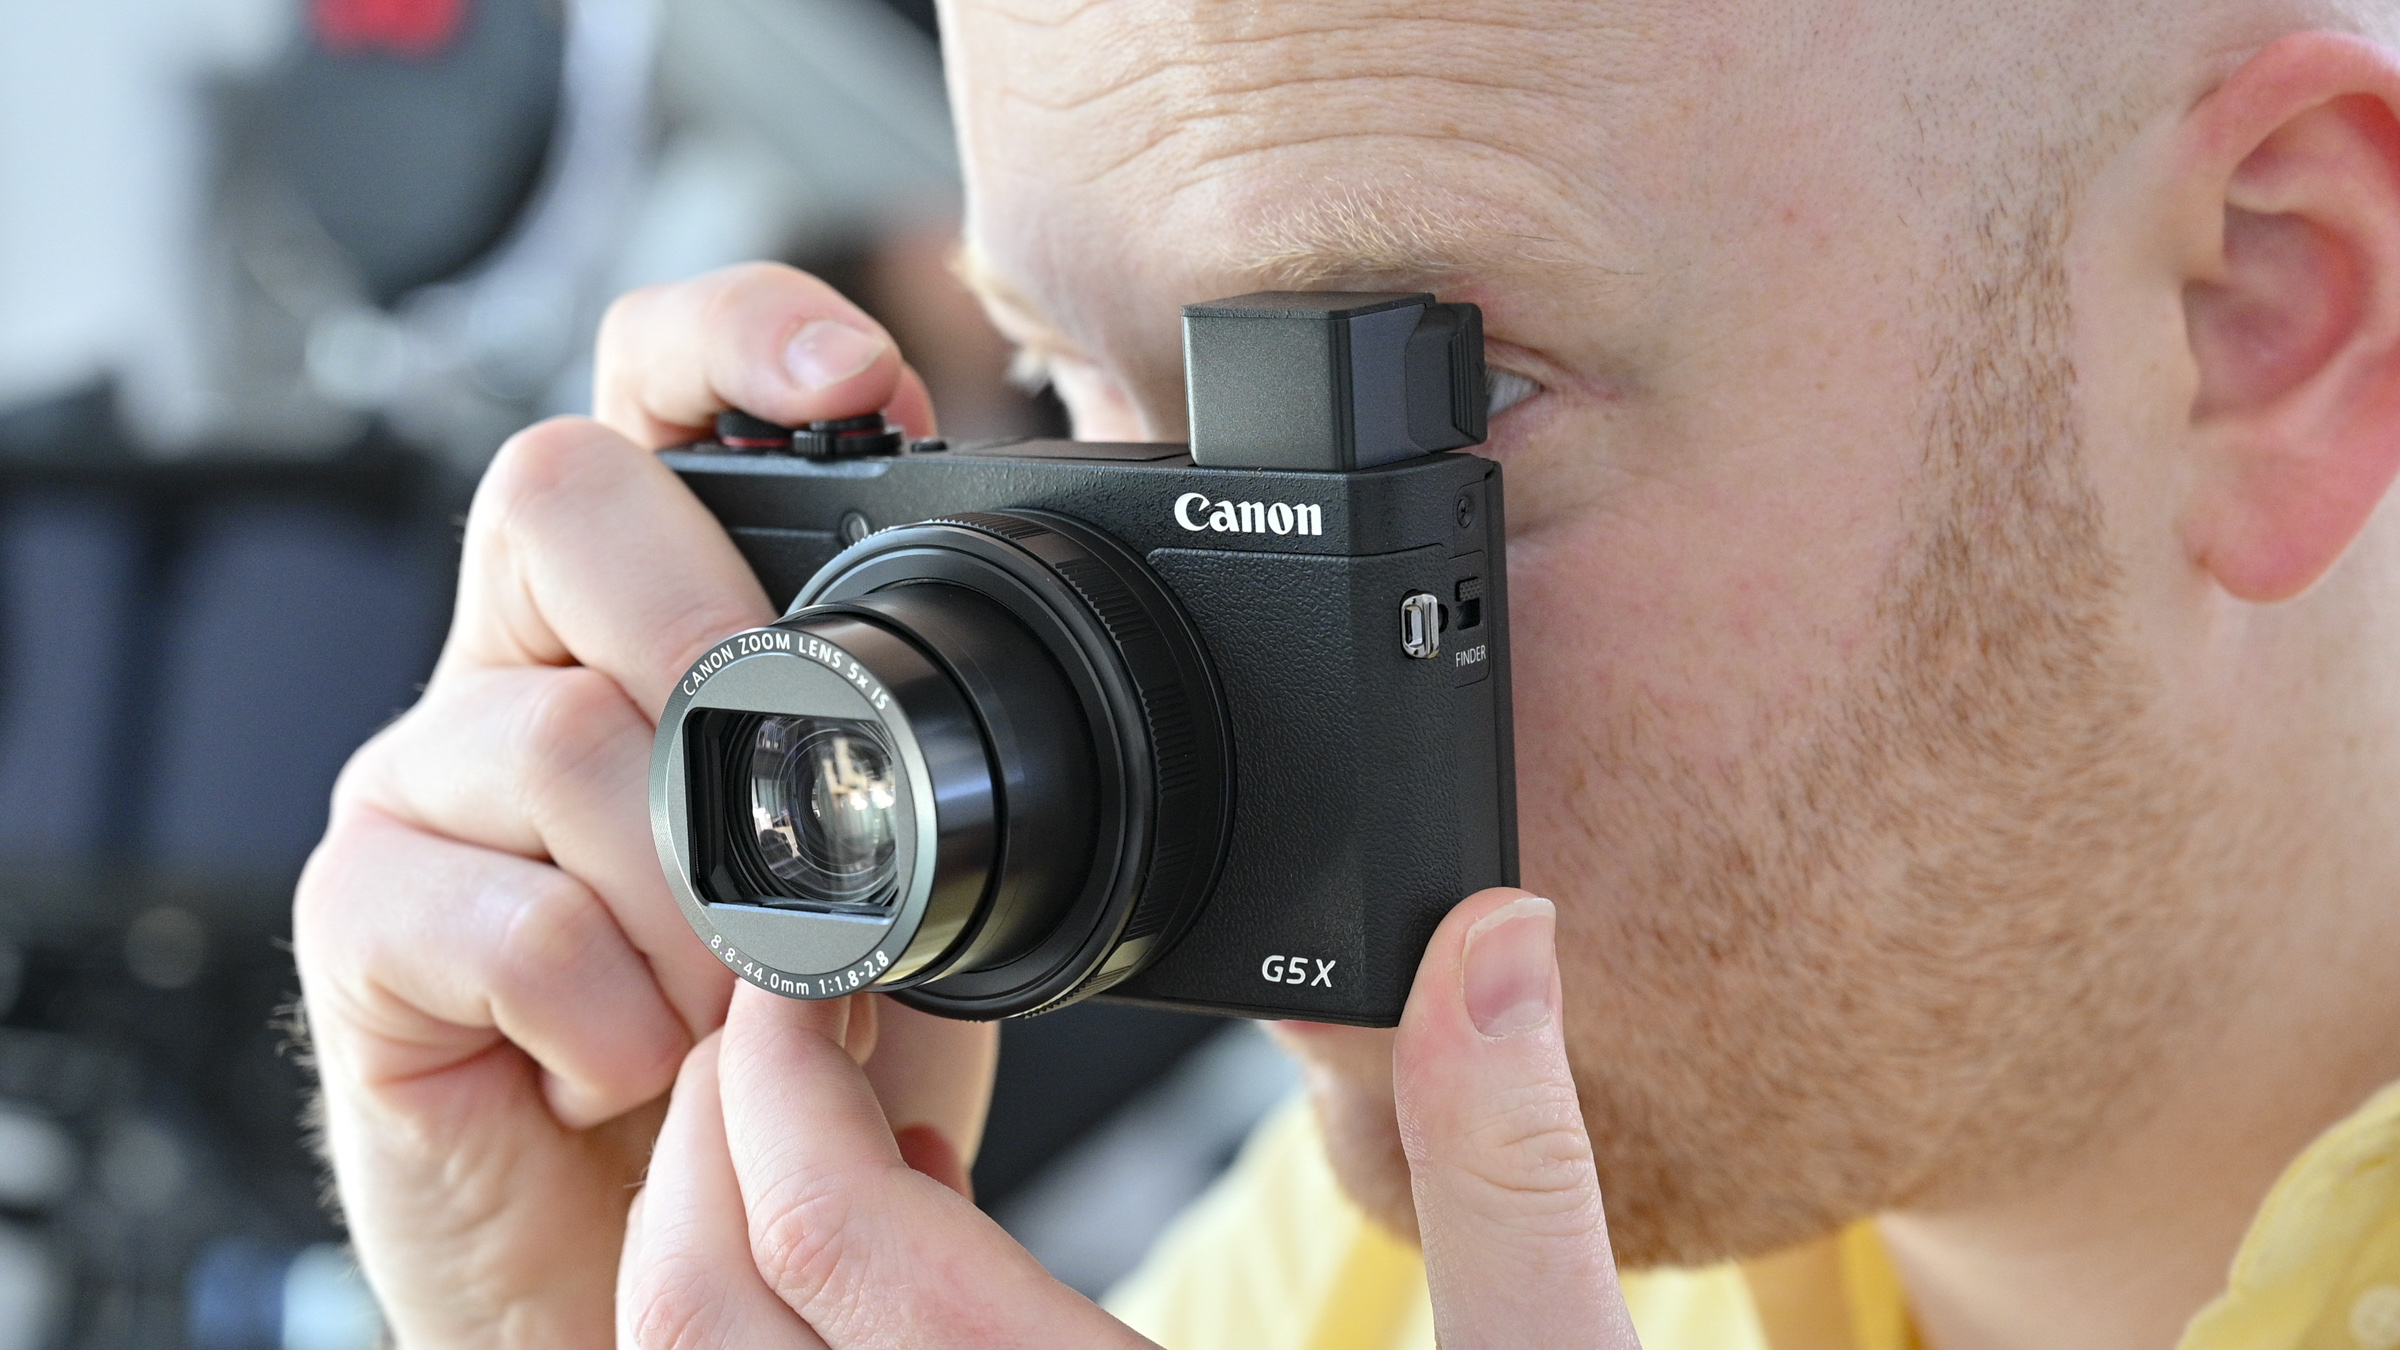 The Canon PowerShot G5 X Mark II, one of the best Canon cameras, being held up to someone's face with its pop-up viewfinder open